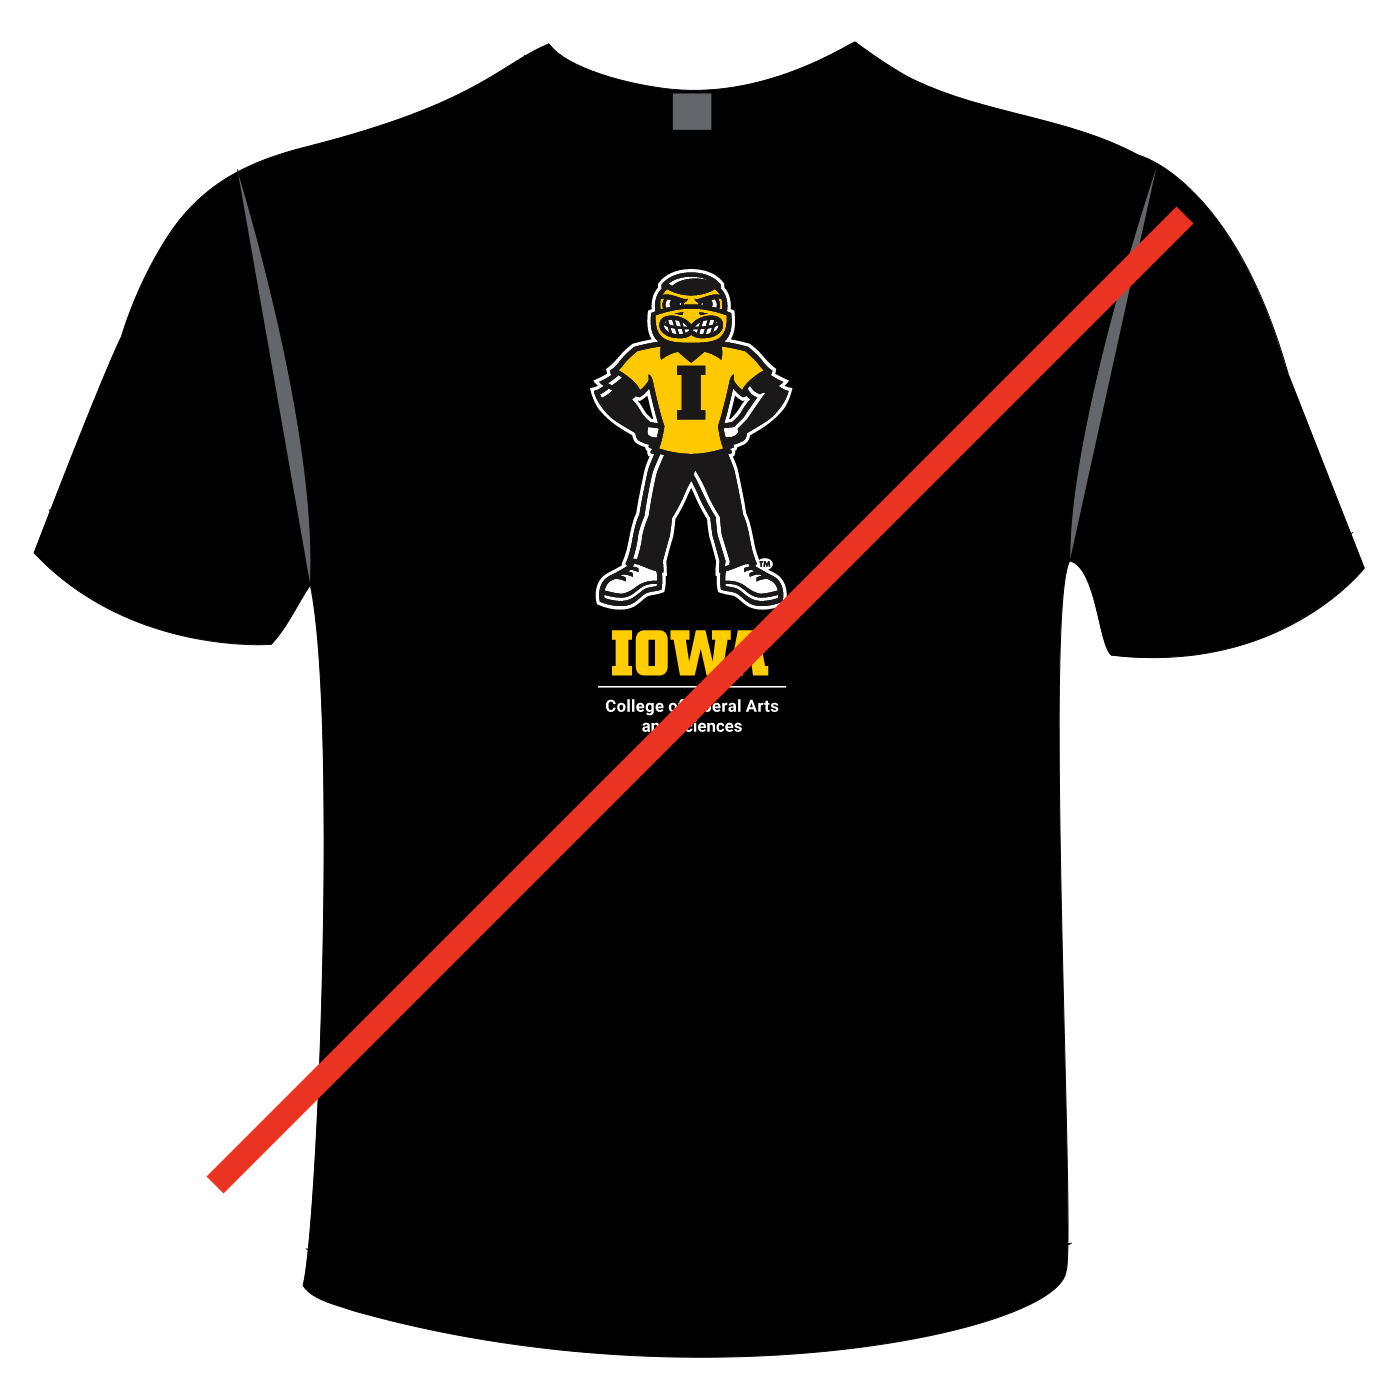 Herky combined with a lockup on the front of a tee